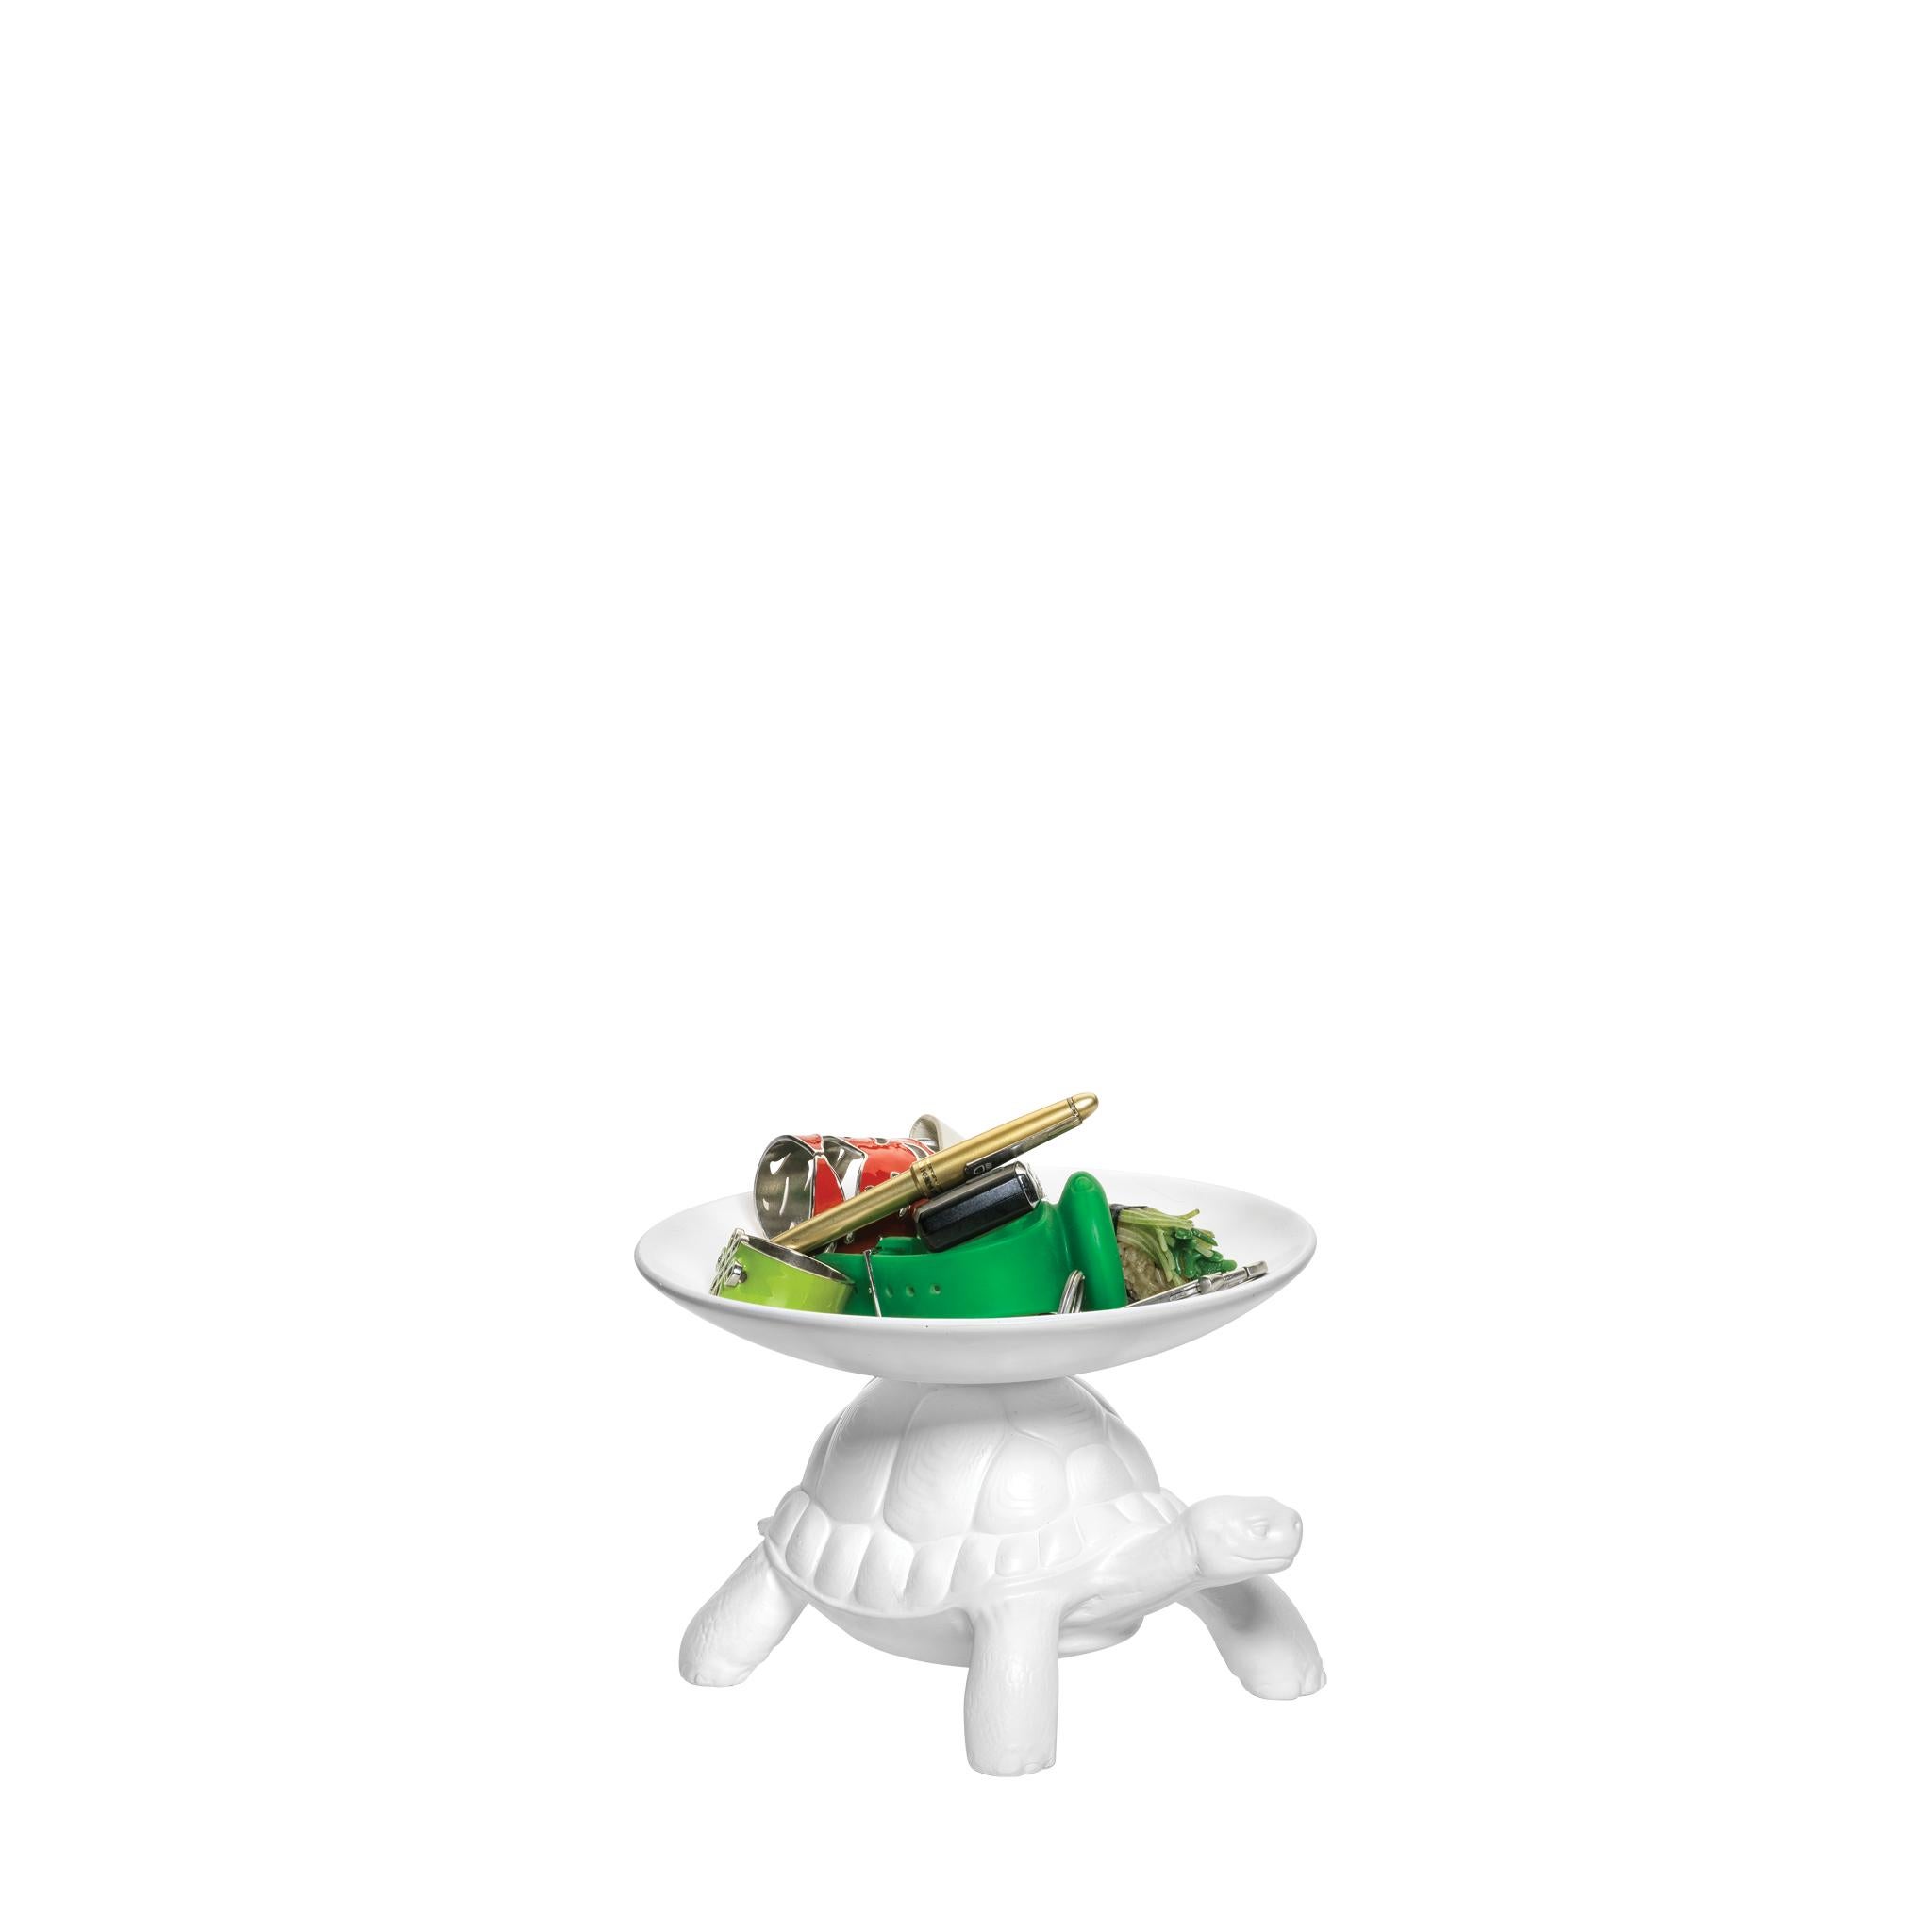 After the success of Turtle Carry, Marcantonio presents the iconic turtles in a small version.
The turtle carapace supports a pocket emptier.

Produced in white opaque resin, they catch the attention and they fit perfectly into any corner of the